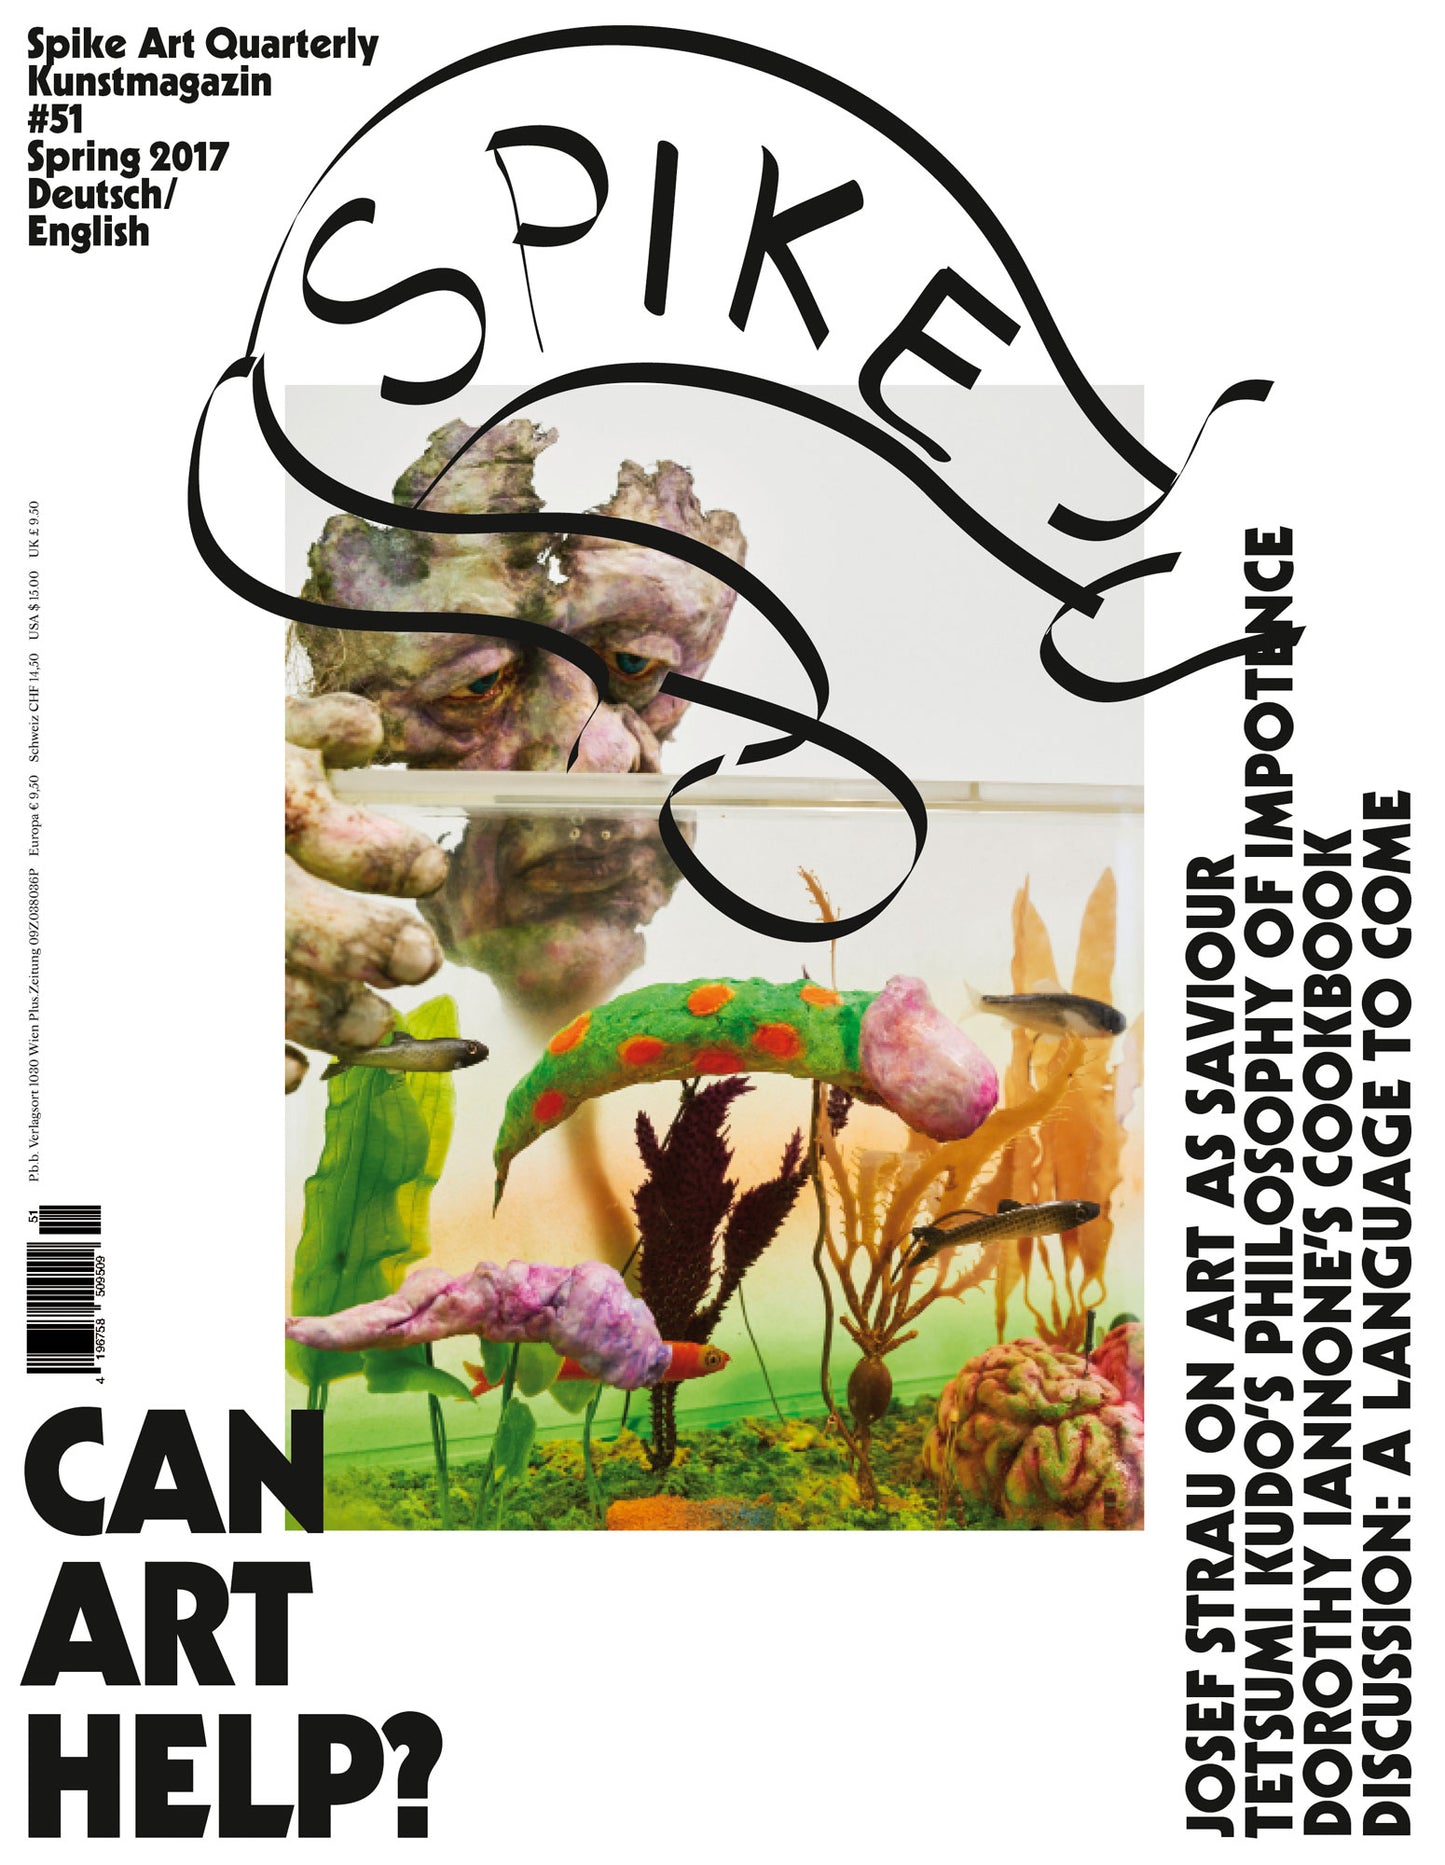 ISSUE 51 (Spring 2017): Can Art Help?